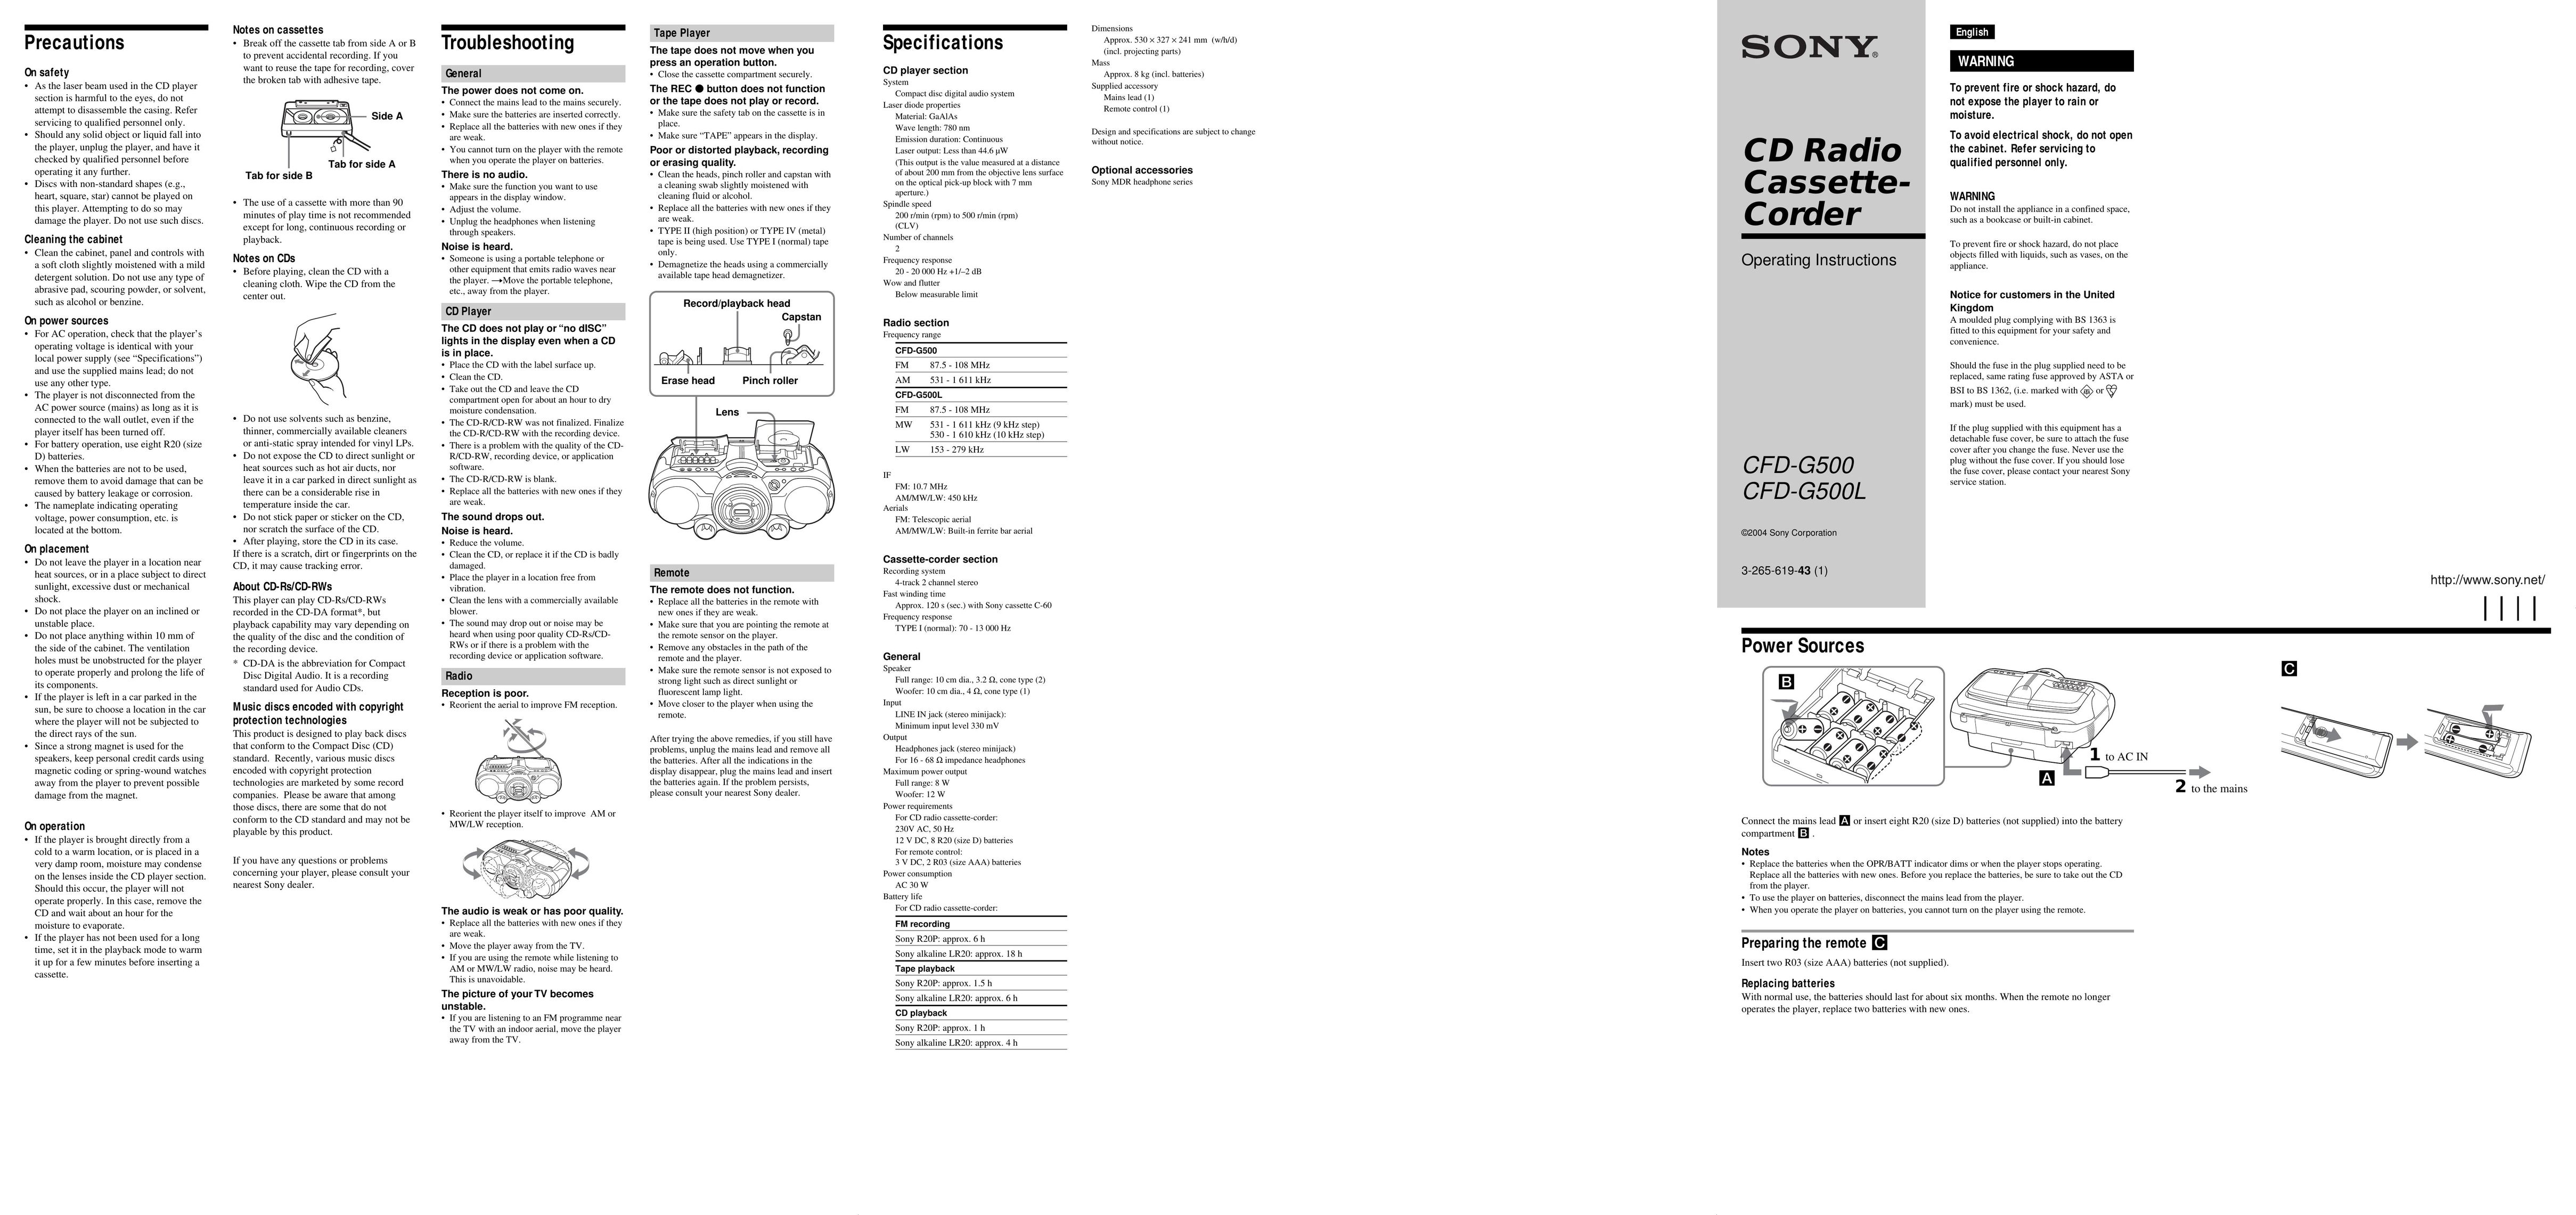 Sony CFD-G500 MP3 Player User Manual